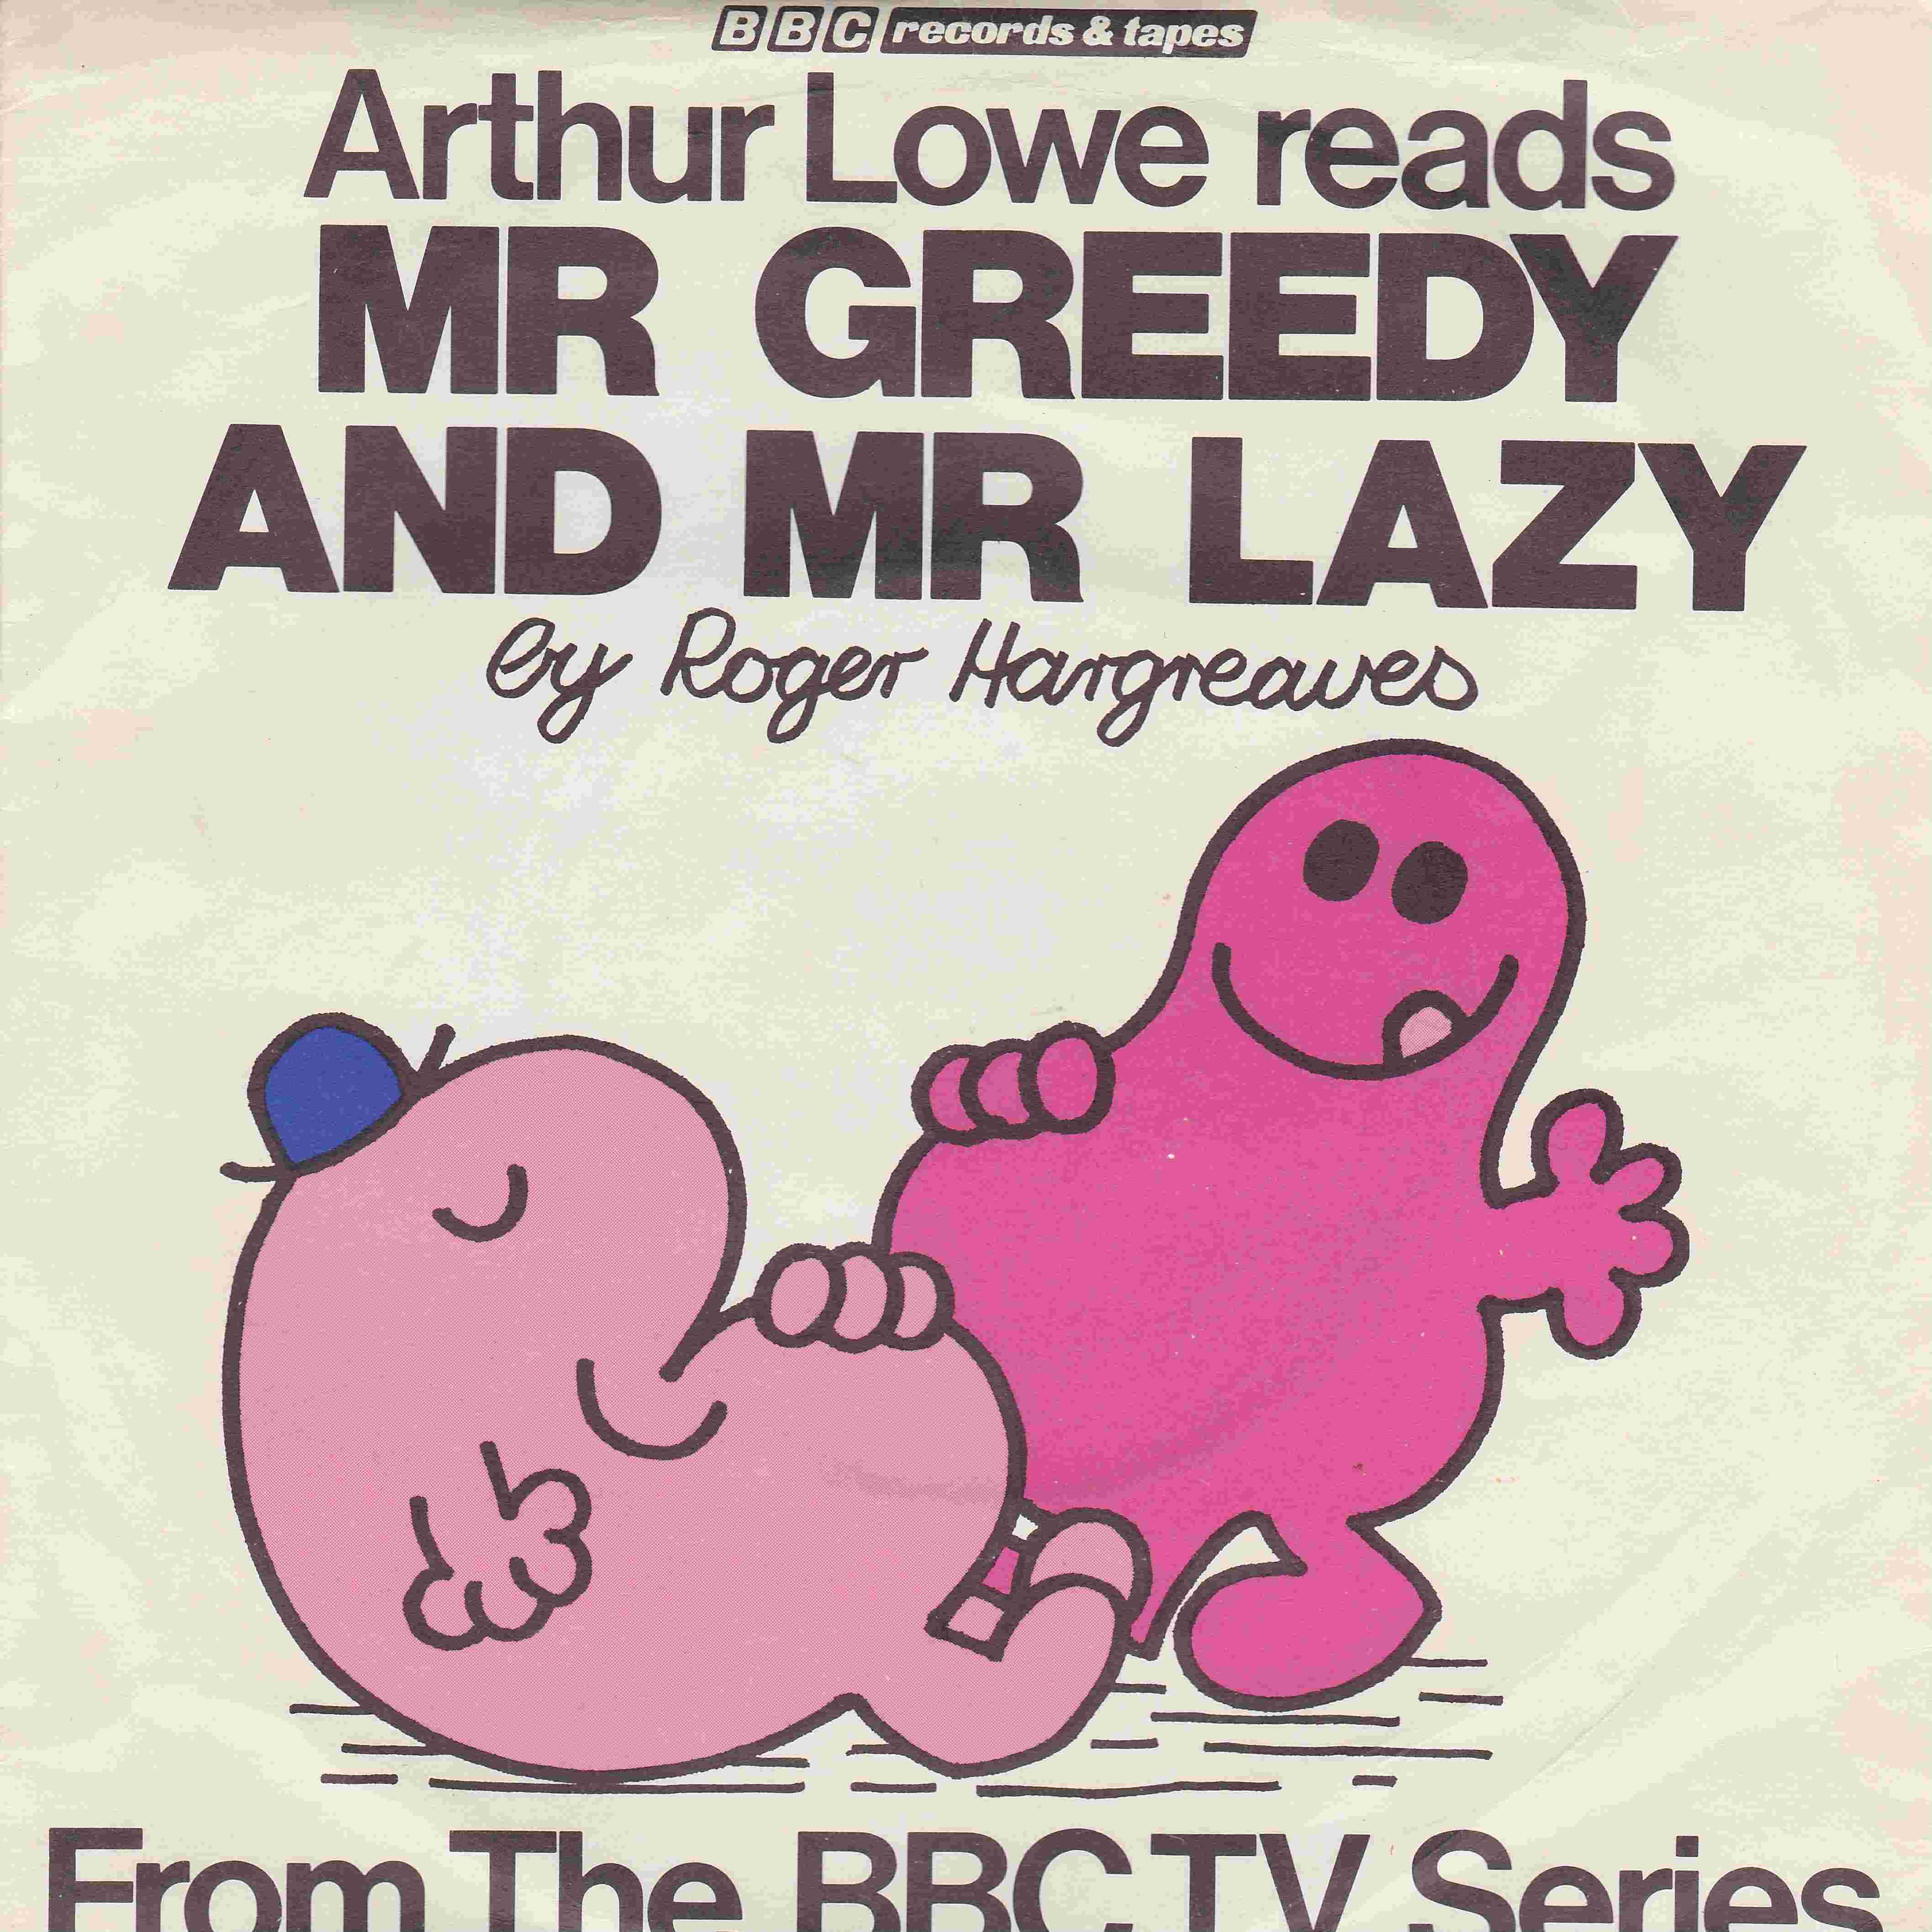 Picture of RESL 42 Mr Men - Mr Greedy by artist Roger Hargreaves from the BBC records and Tapes library